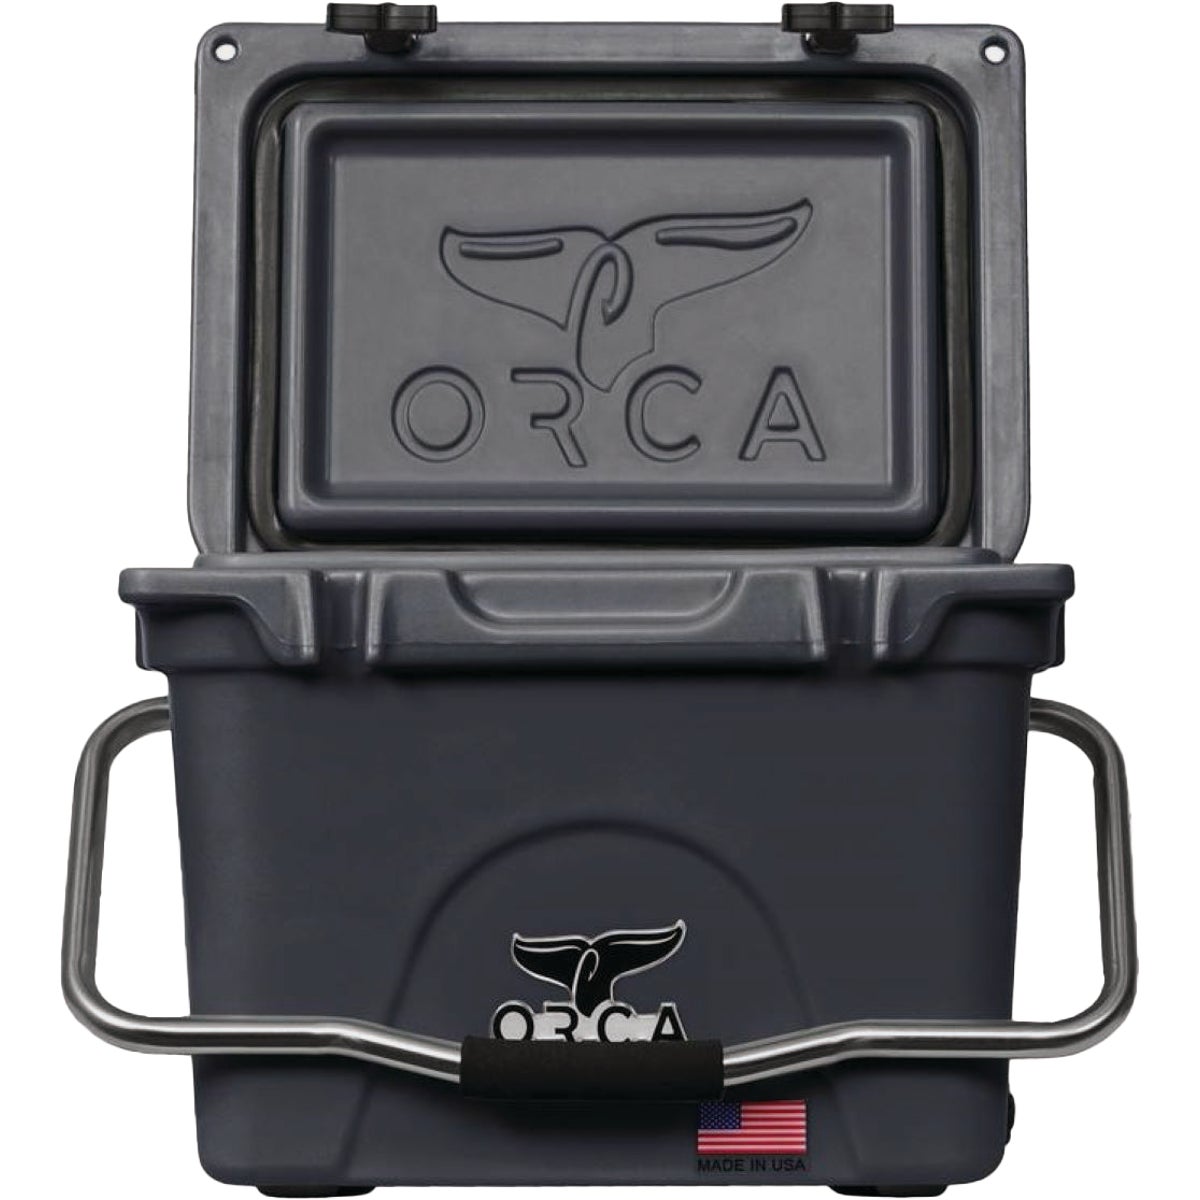 ORCA ORCCH020 Orca 20 Qt. 18-Can Cooler, Charcoal Gray ORCCH020